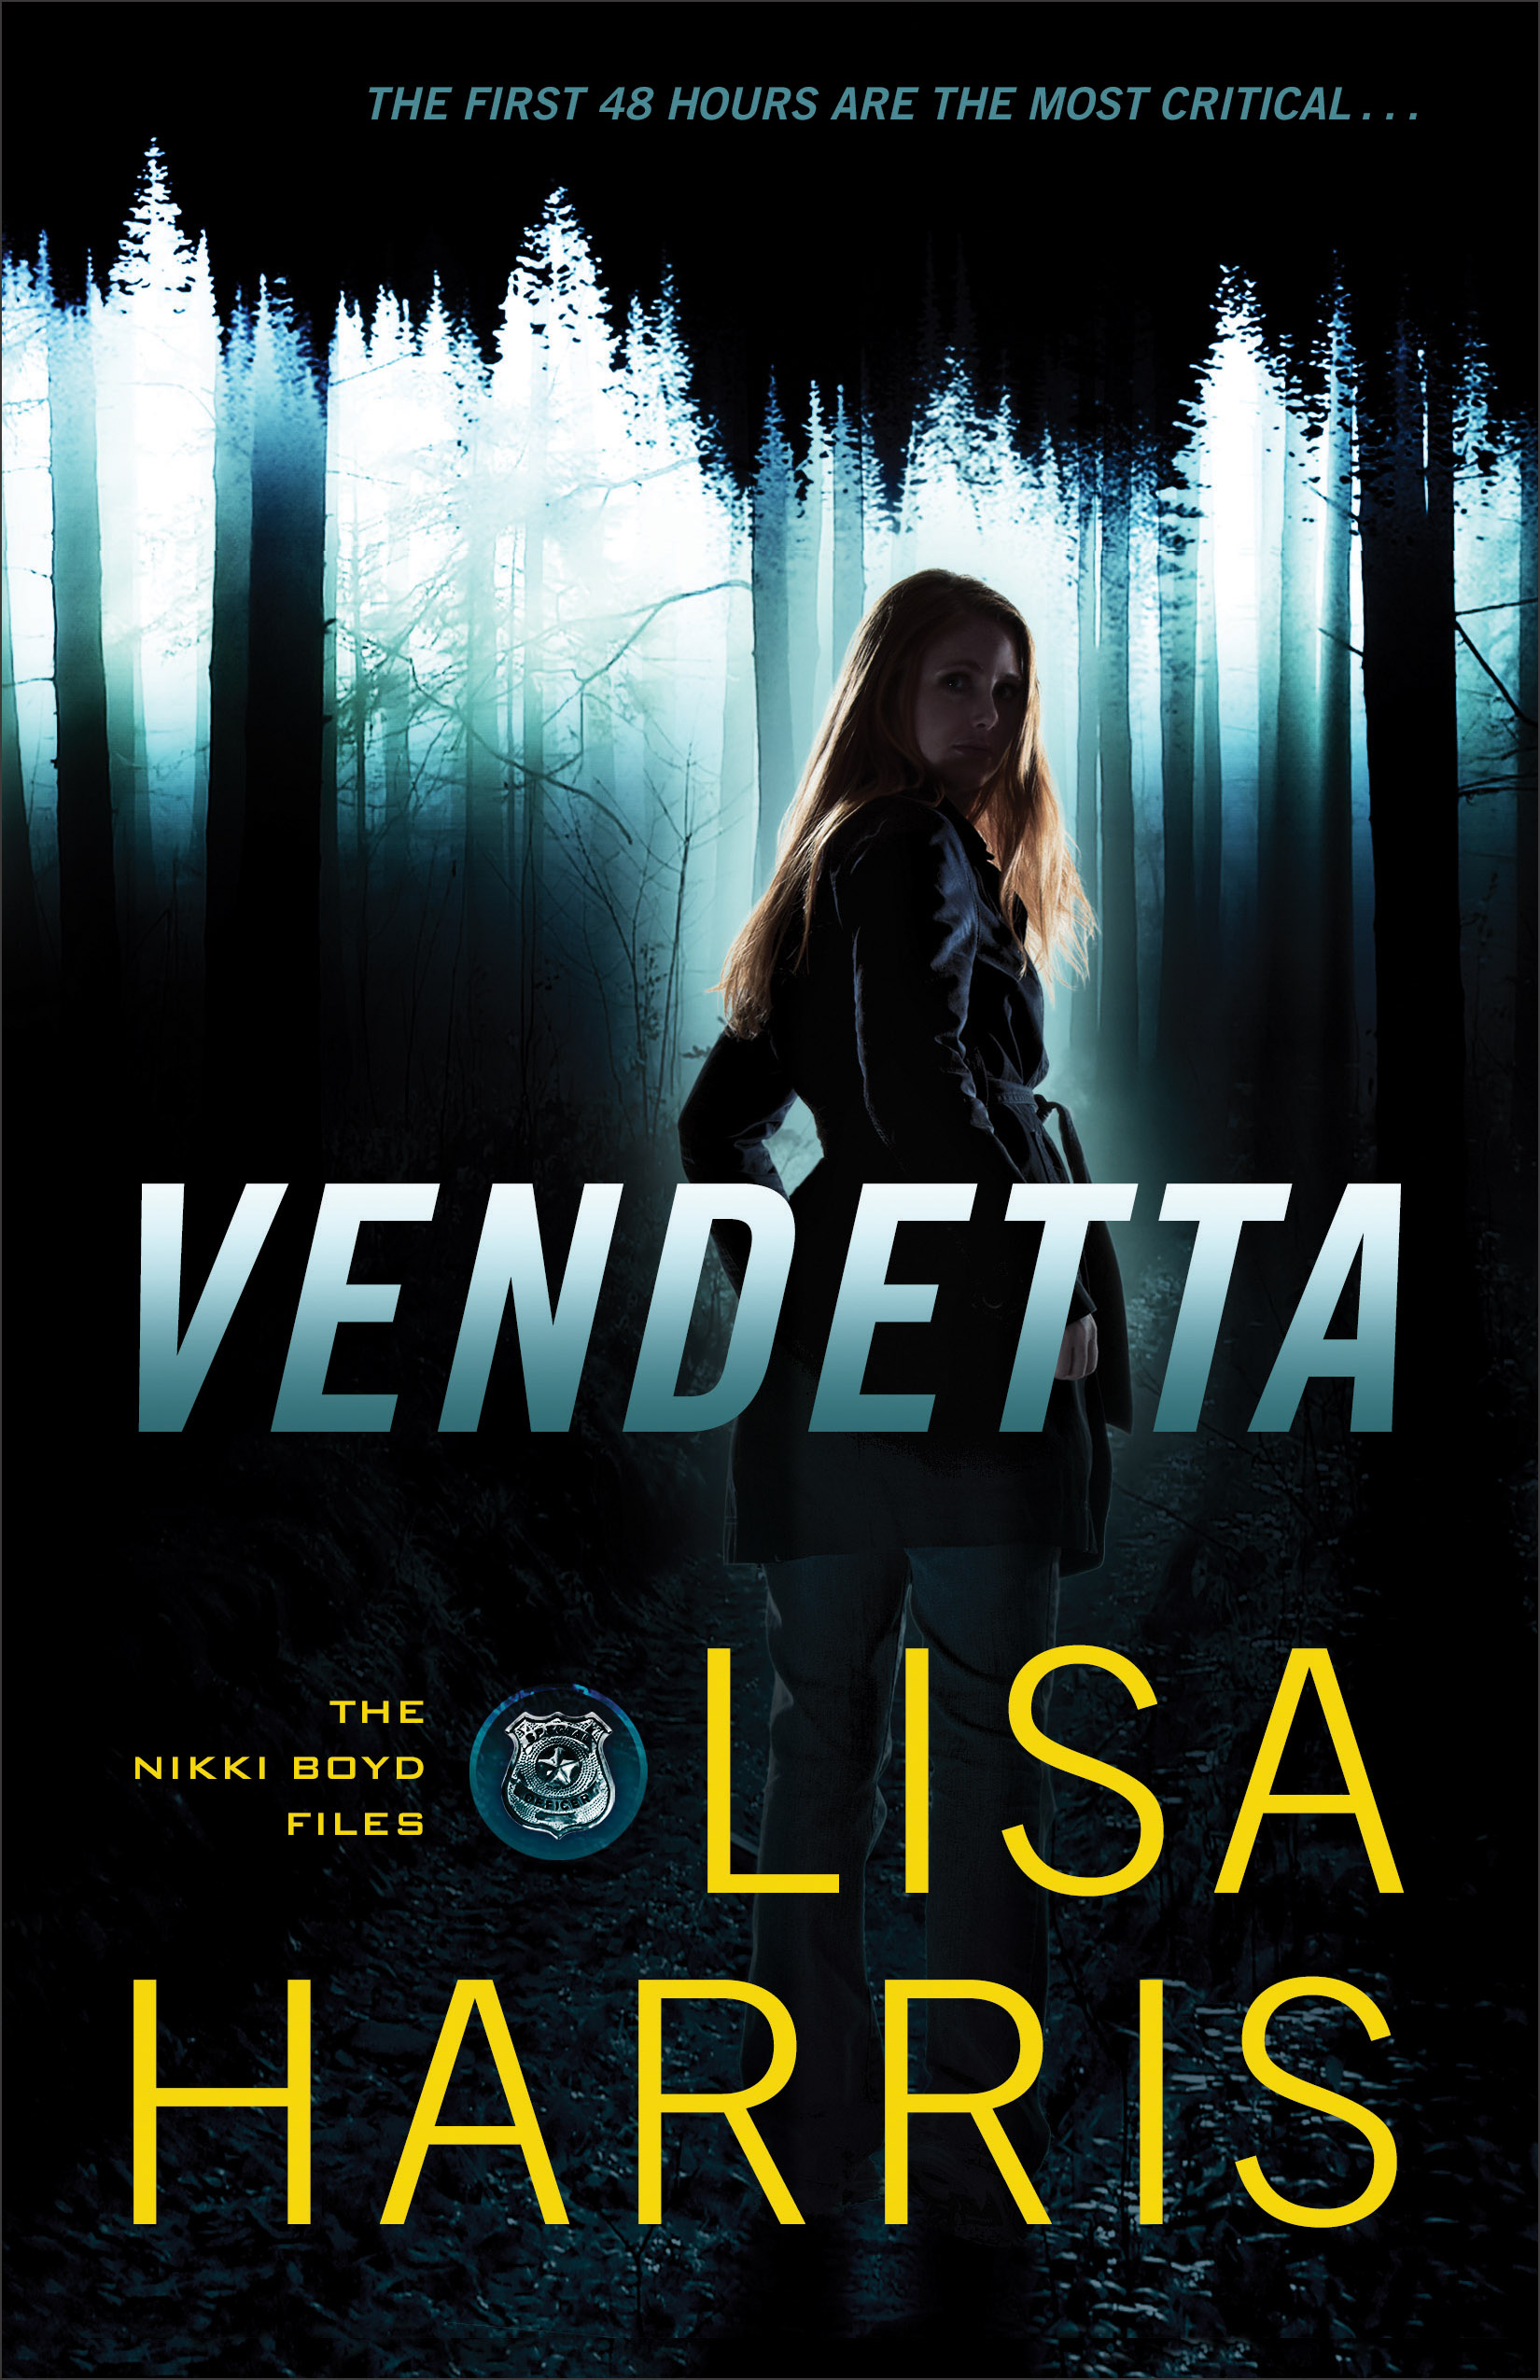 book review: vendetta by lisa harris